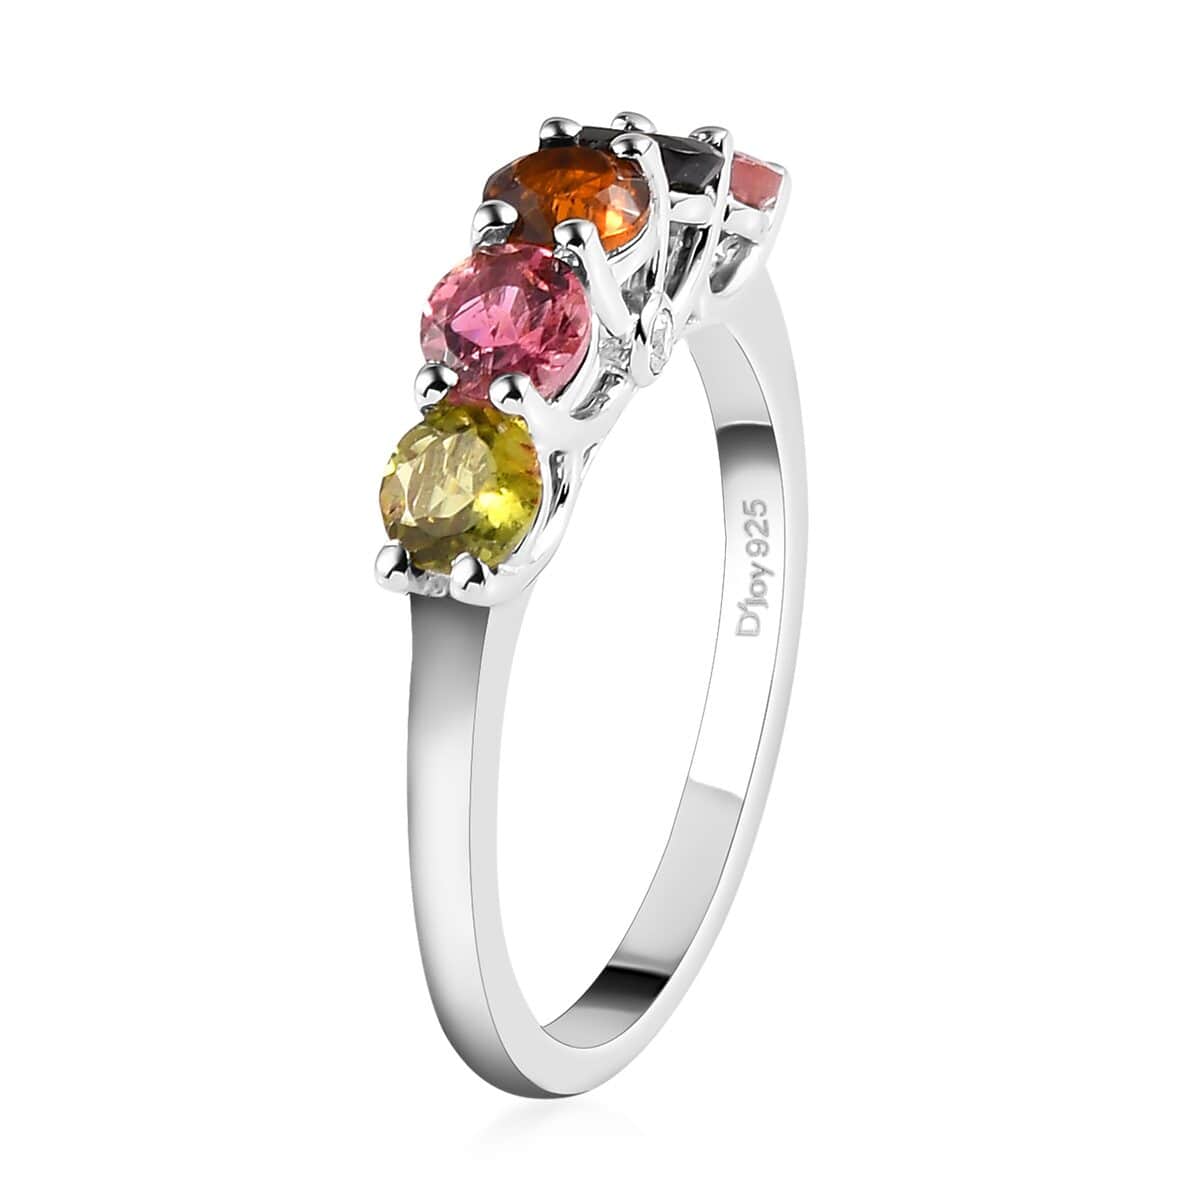 doorbuster-multi-tourmaline-and-natural-white-zircon-5-stone-ring-in-platinum-over-sterling-silver-size-10.0-1.35-ctw image number 3